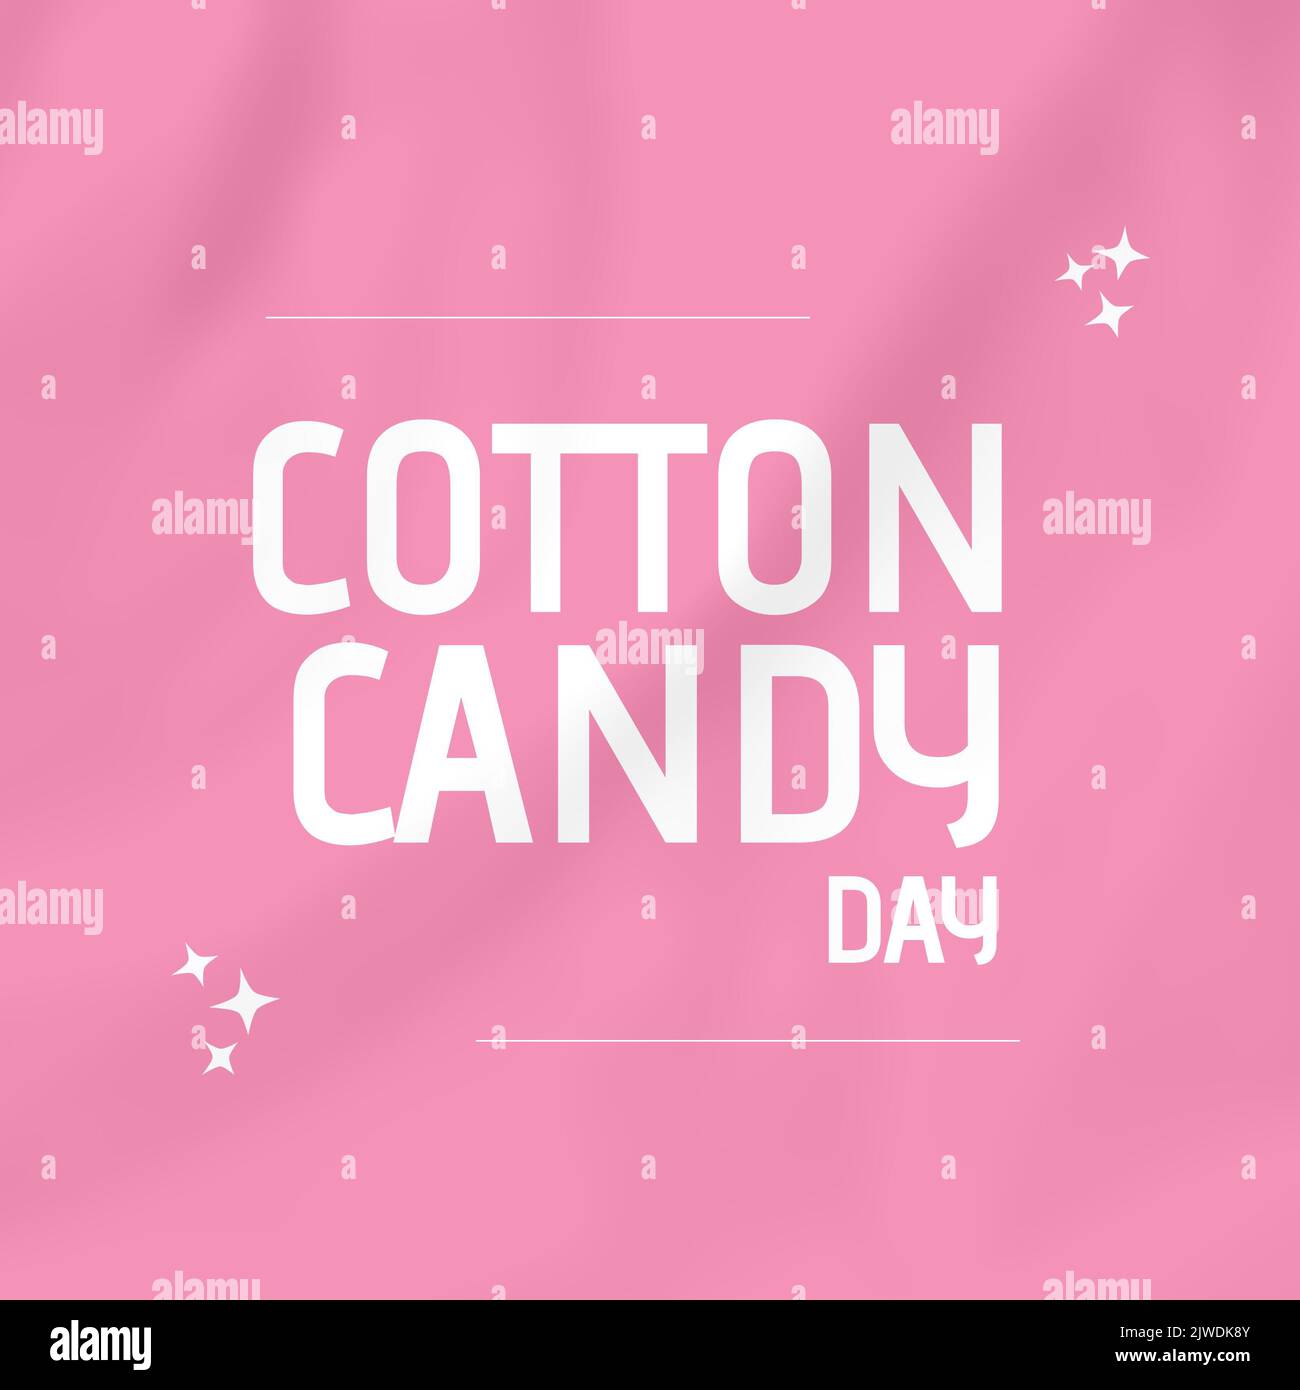 Illustration of cotton candy day text in white color stars over pink background, copy space Stock Photo